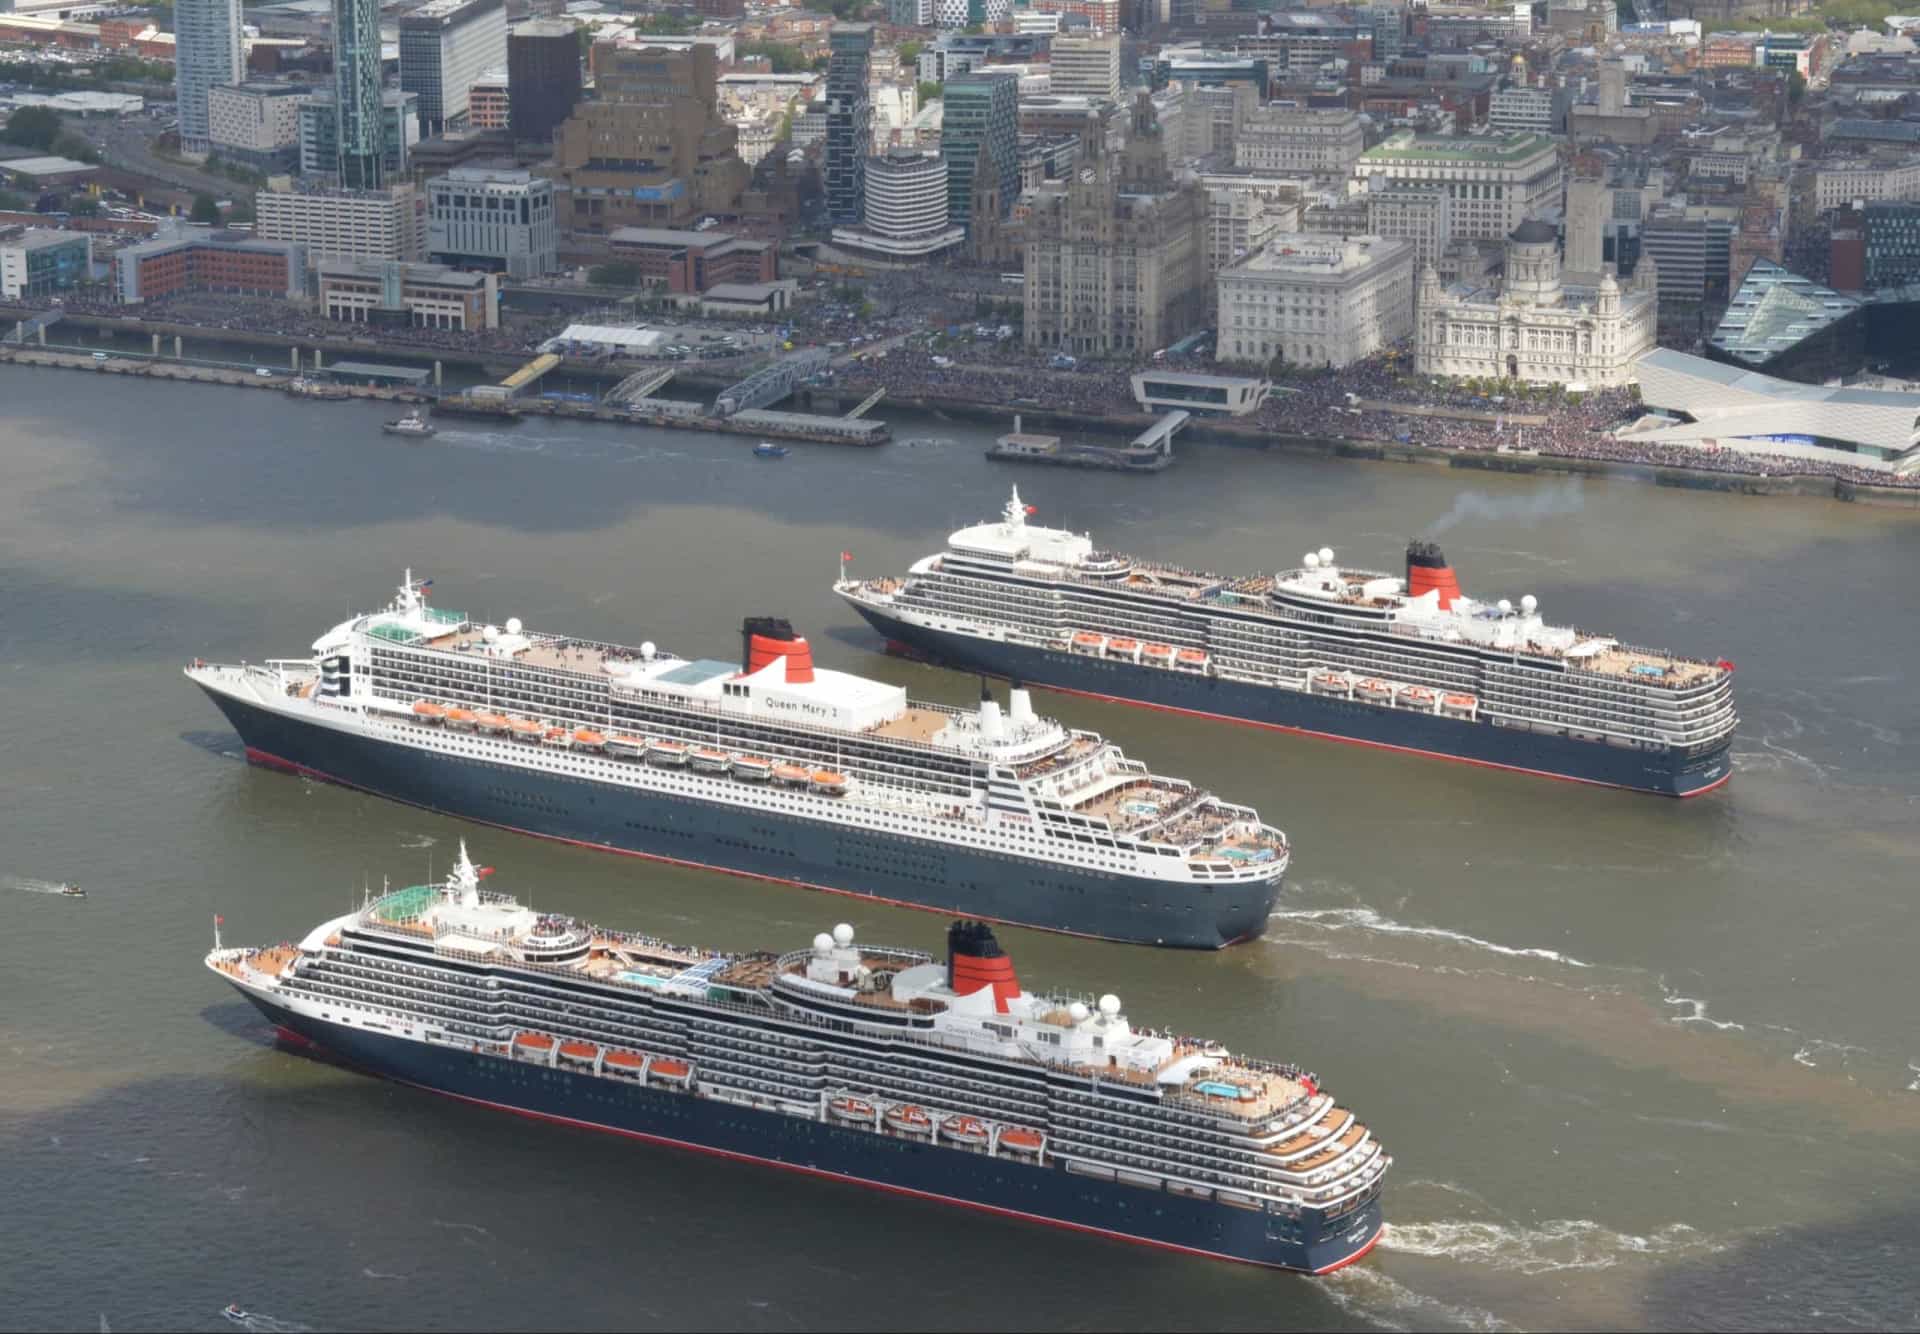 <p>In 2015, Cunard's three Queens met on the River Mersey in Liverpool to celebrate the company's 175th anniversary—MS <em>Queen Mary 2</em>, MS <em>Queen Victoria</em>, and MS <em>Queen Elizabeth.</em></p><p>You may also like:<a href="https://www.starsinsider.com/n/498374?utm_source=msn.com&utm_medium=display&utm_campaign=referral_description&utm_content=597926en-za"> World leaders who took power via coups</a></p>